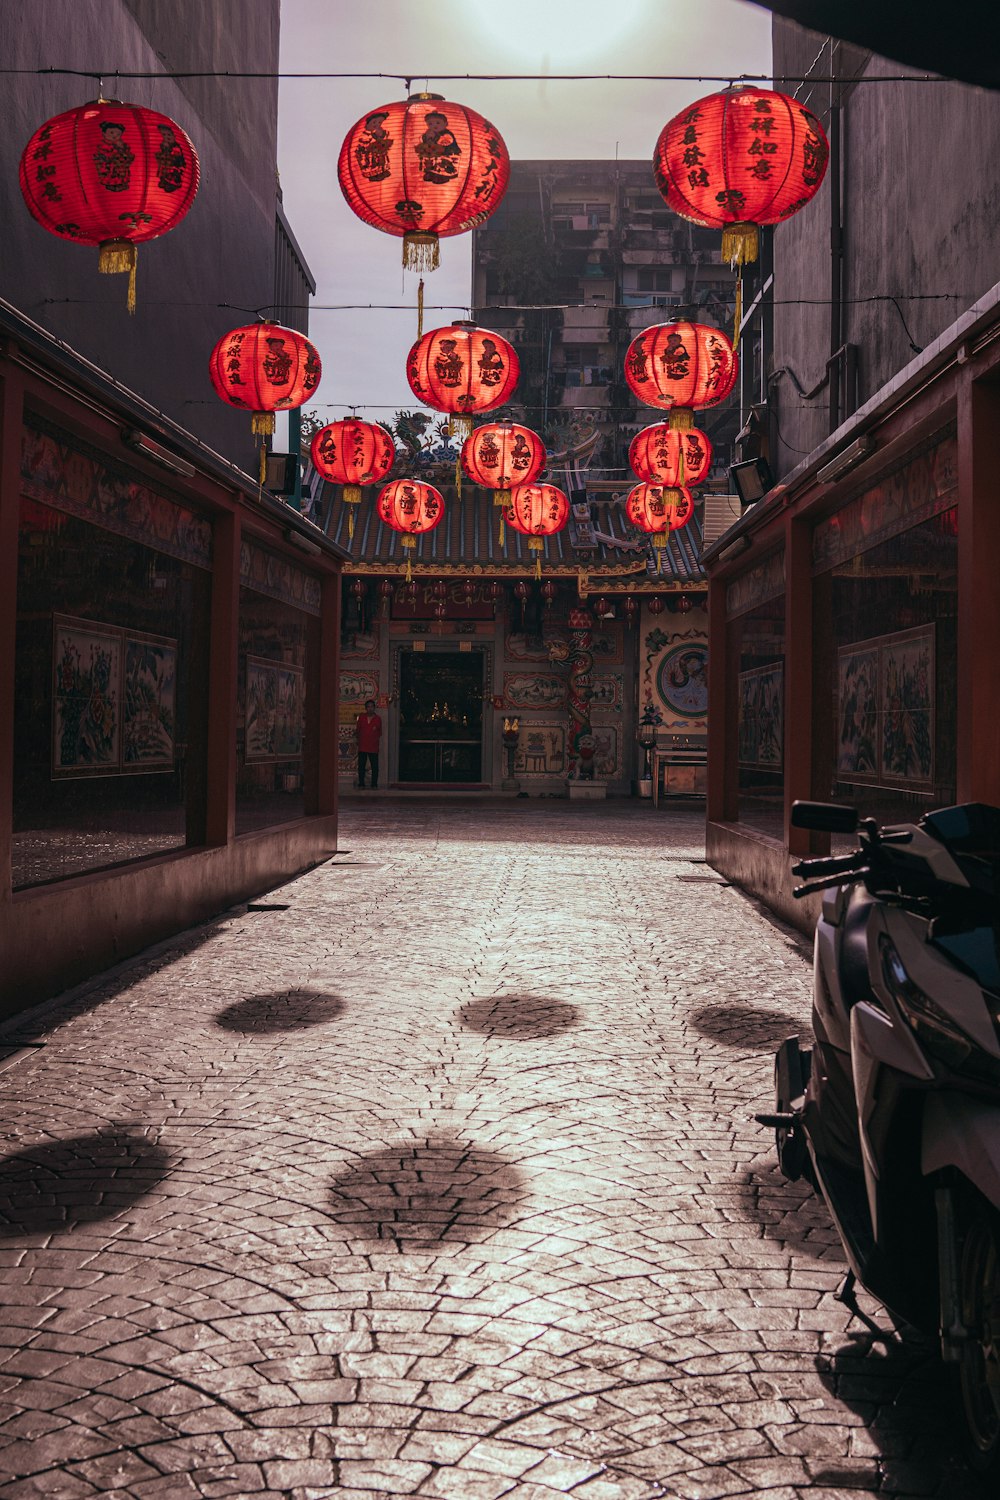 a motorcycle parked on a cobblestone street under red lanterns